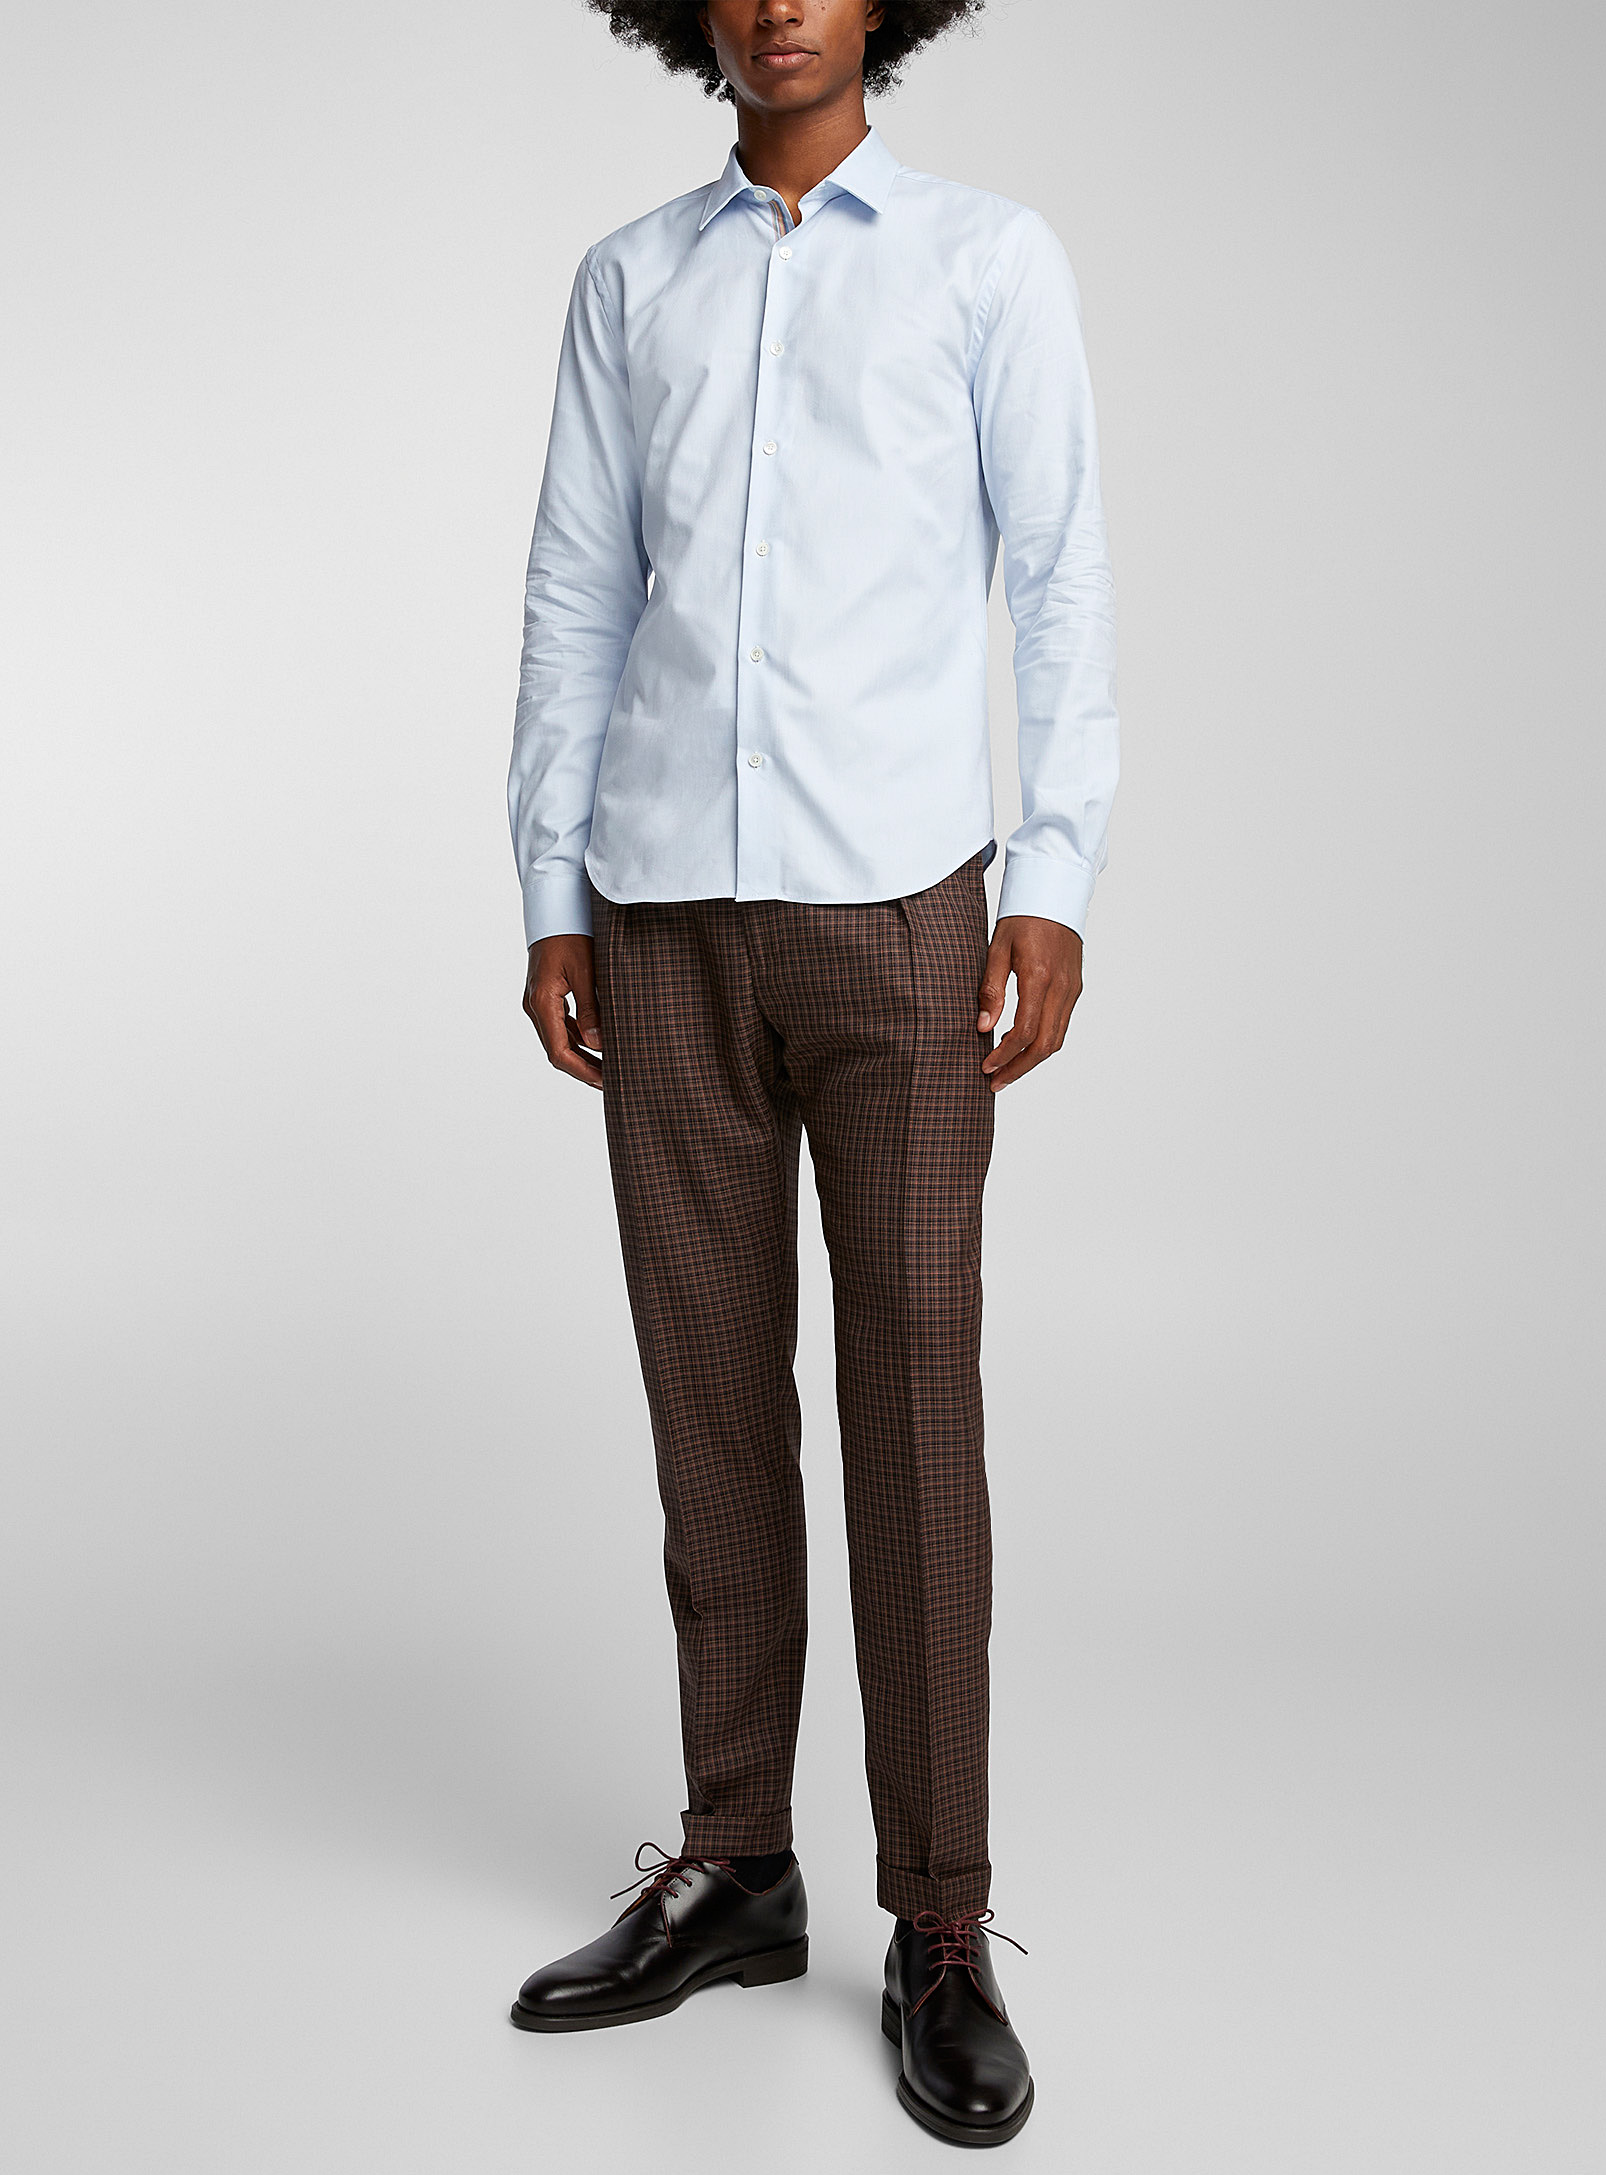 Paul Smith - Men's Cuffed checkered pant